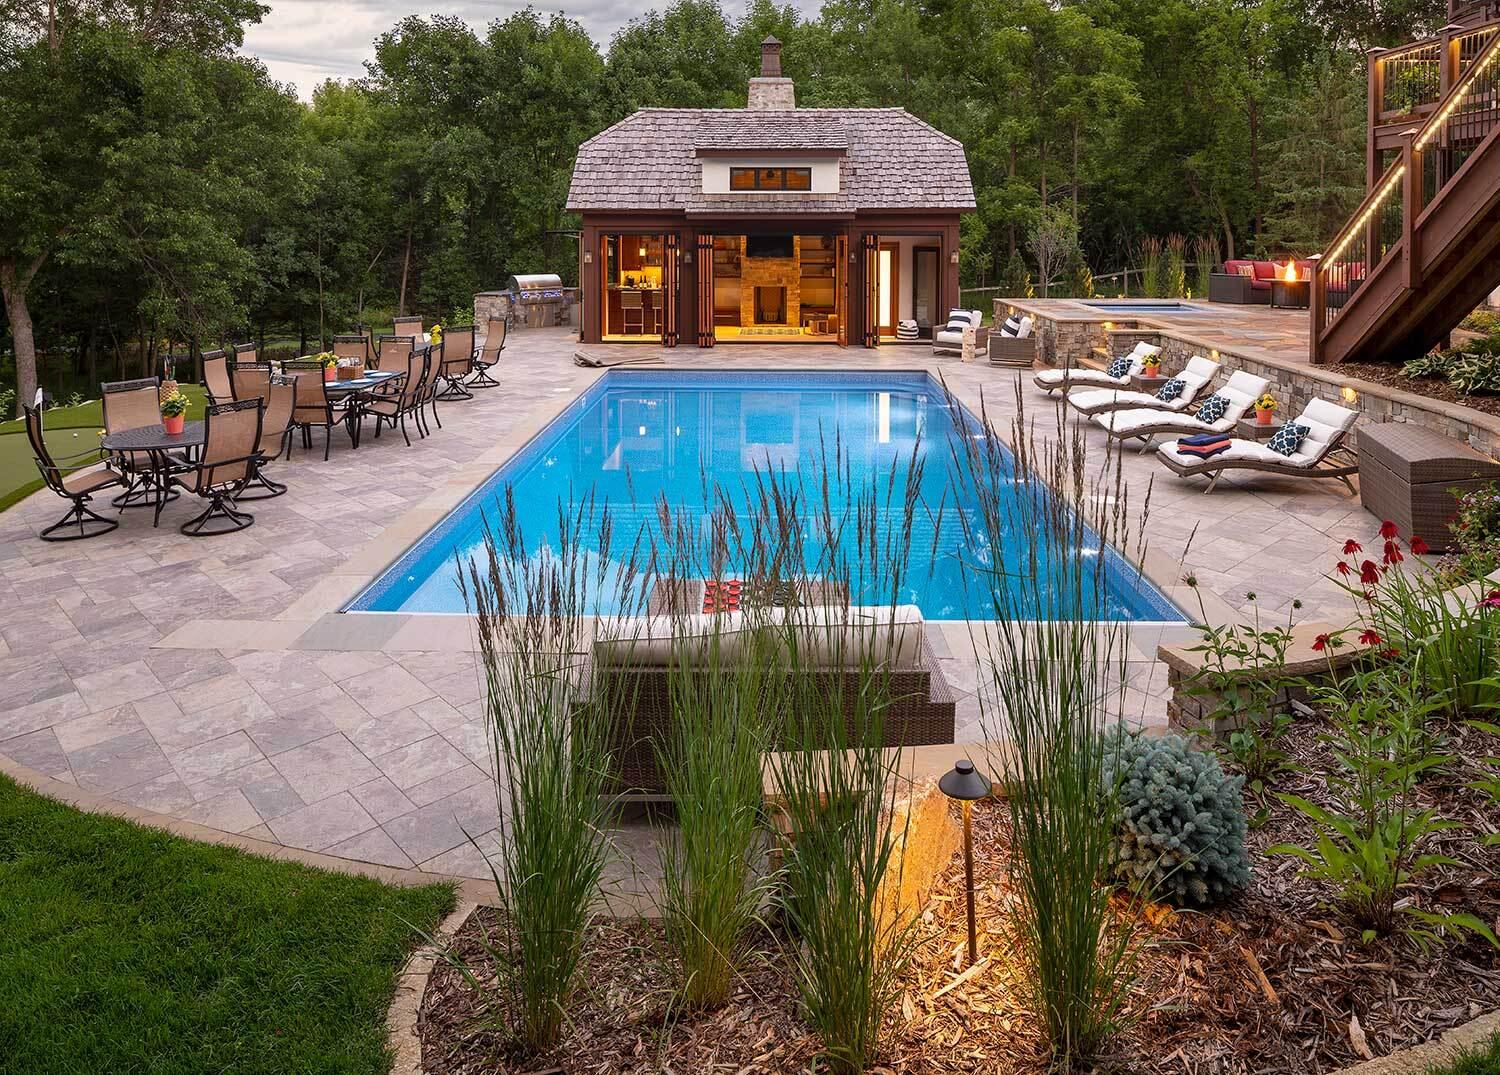 Lake Minnetonka backyard plunge pool and hot tub, middle patio with fire, kitchen and dining patio